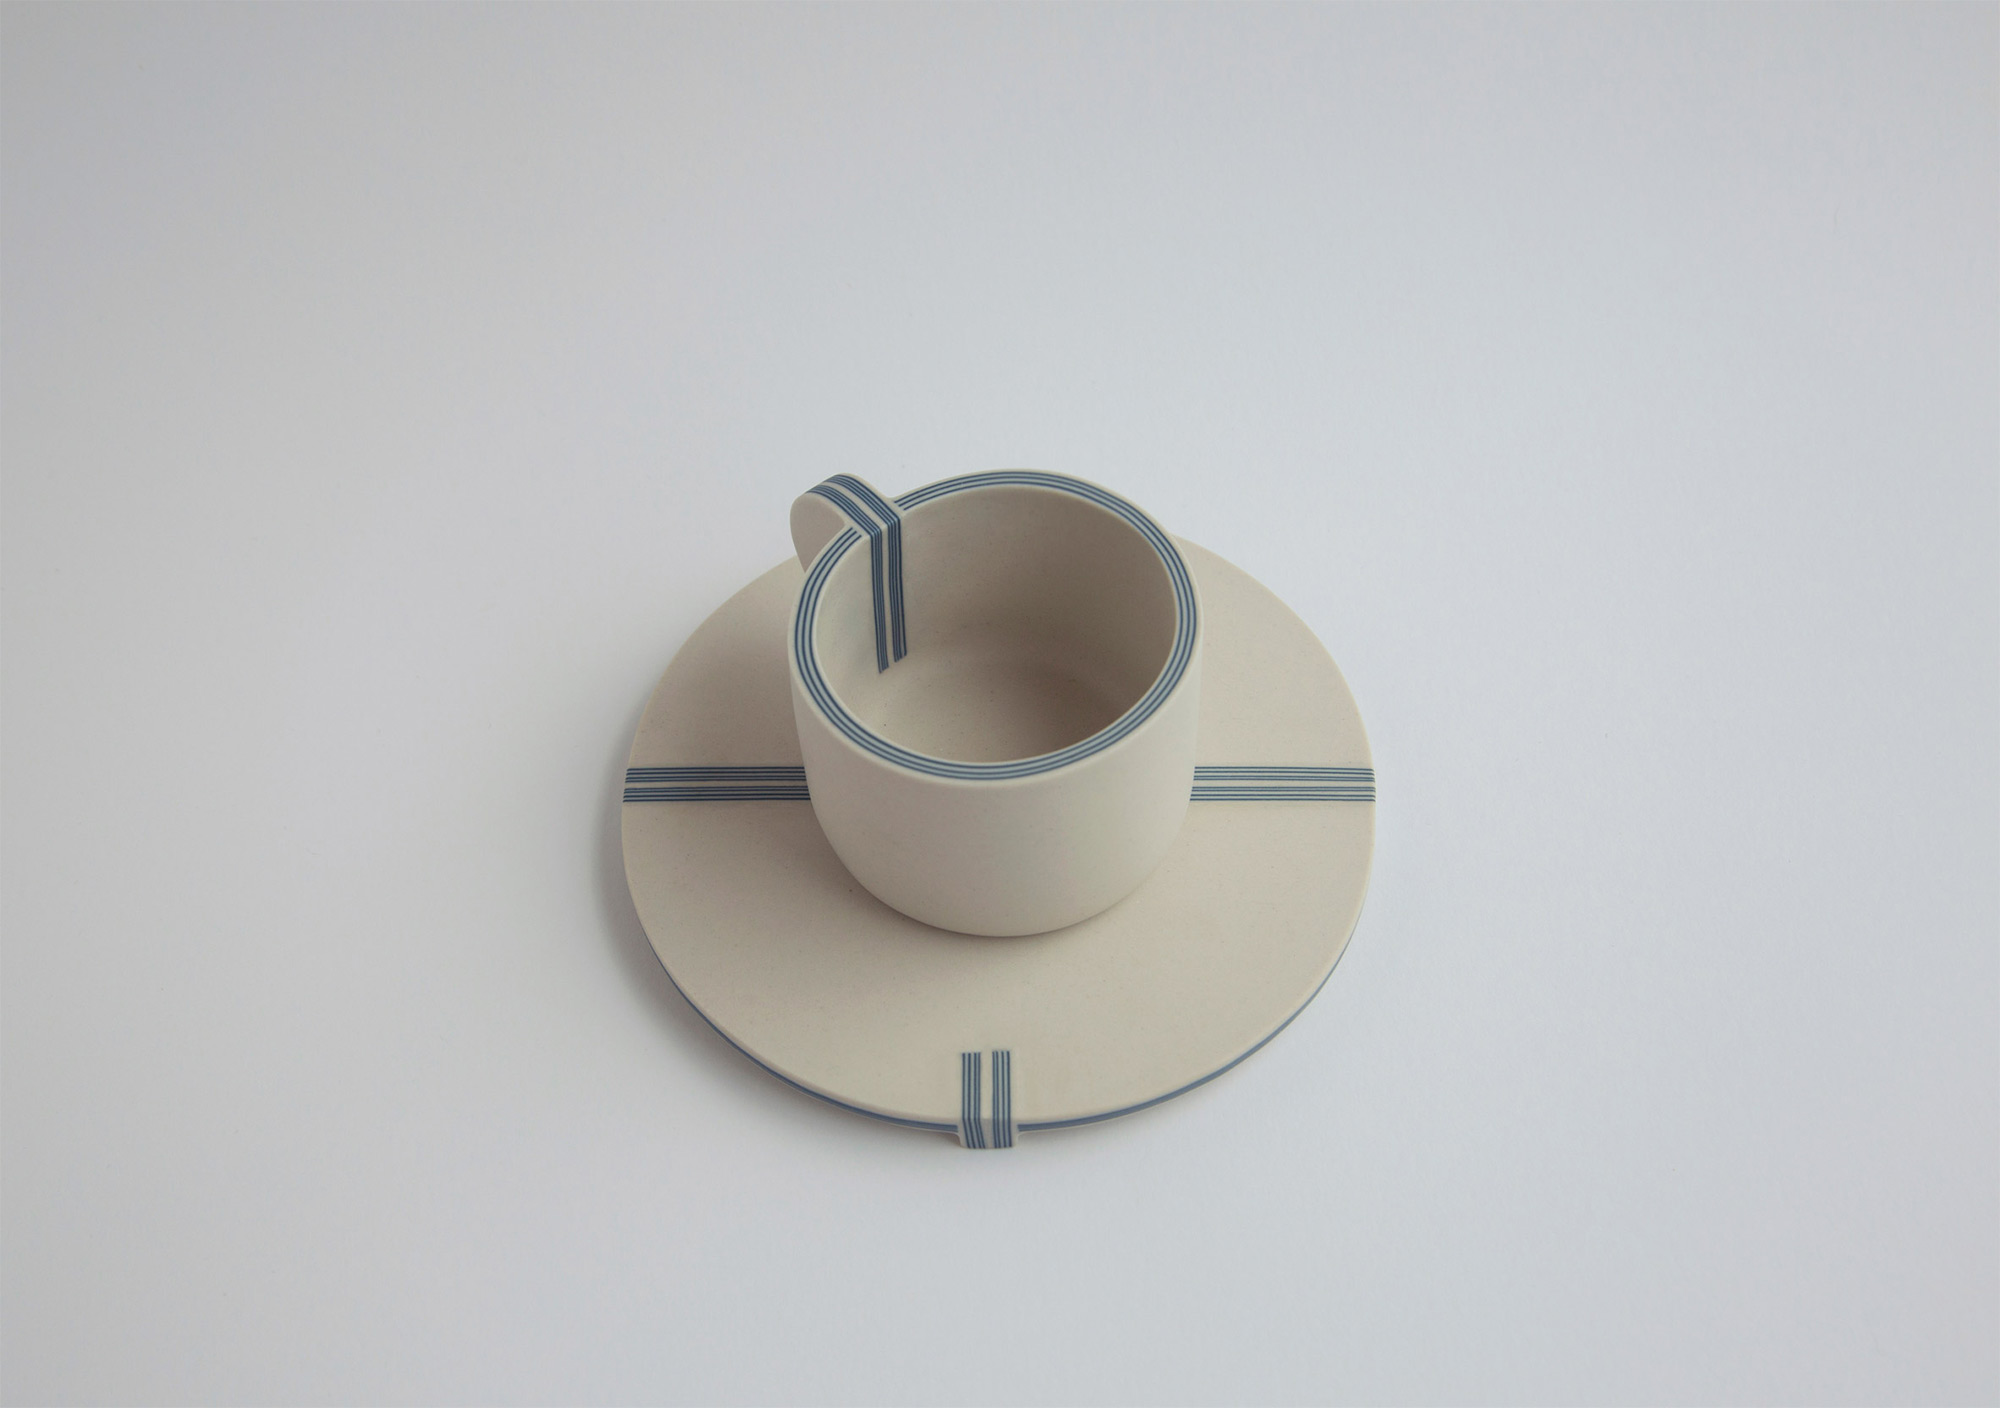 Up To 29 Porcelain Layers Molded into Elegant Tableware by Yuting Chang